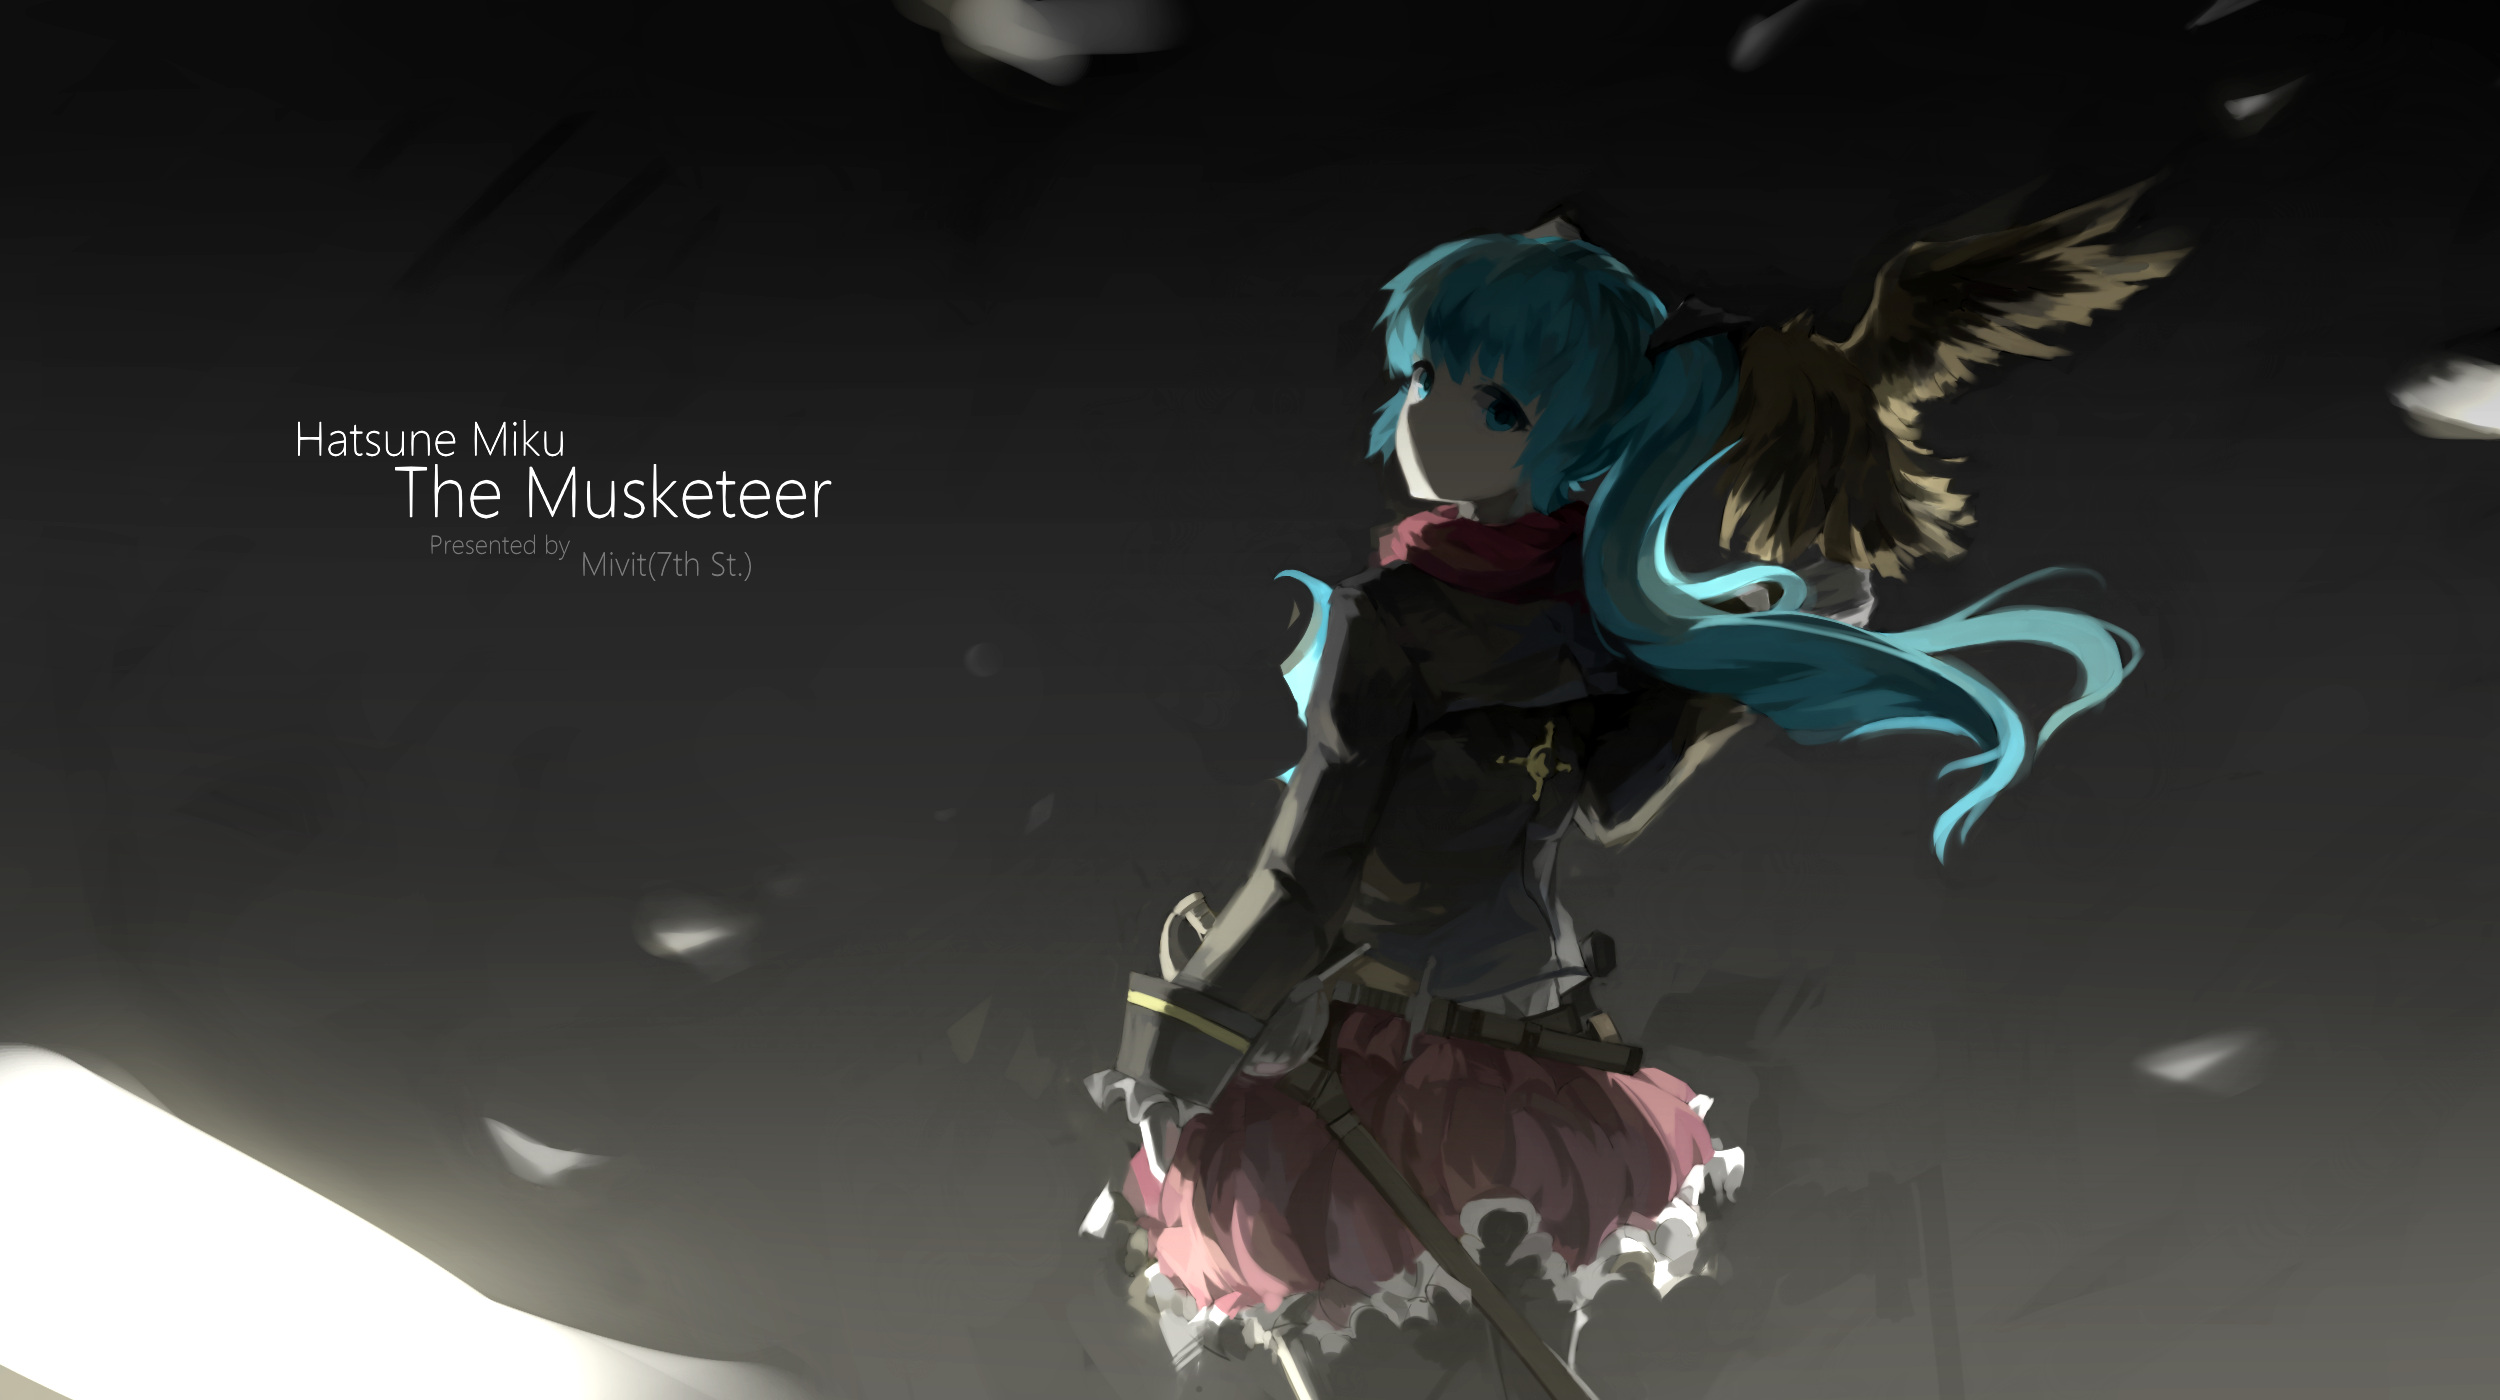 Hatsune Miku The Musketeer 裏表紙 by Mivit (7th St.)